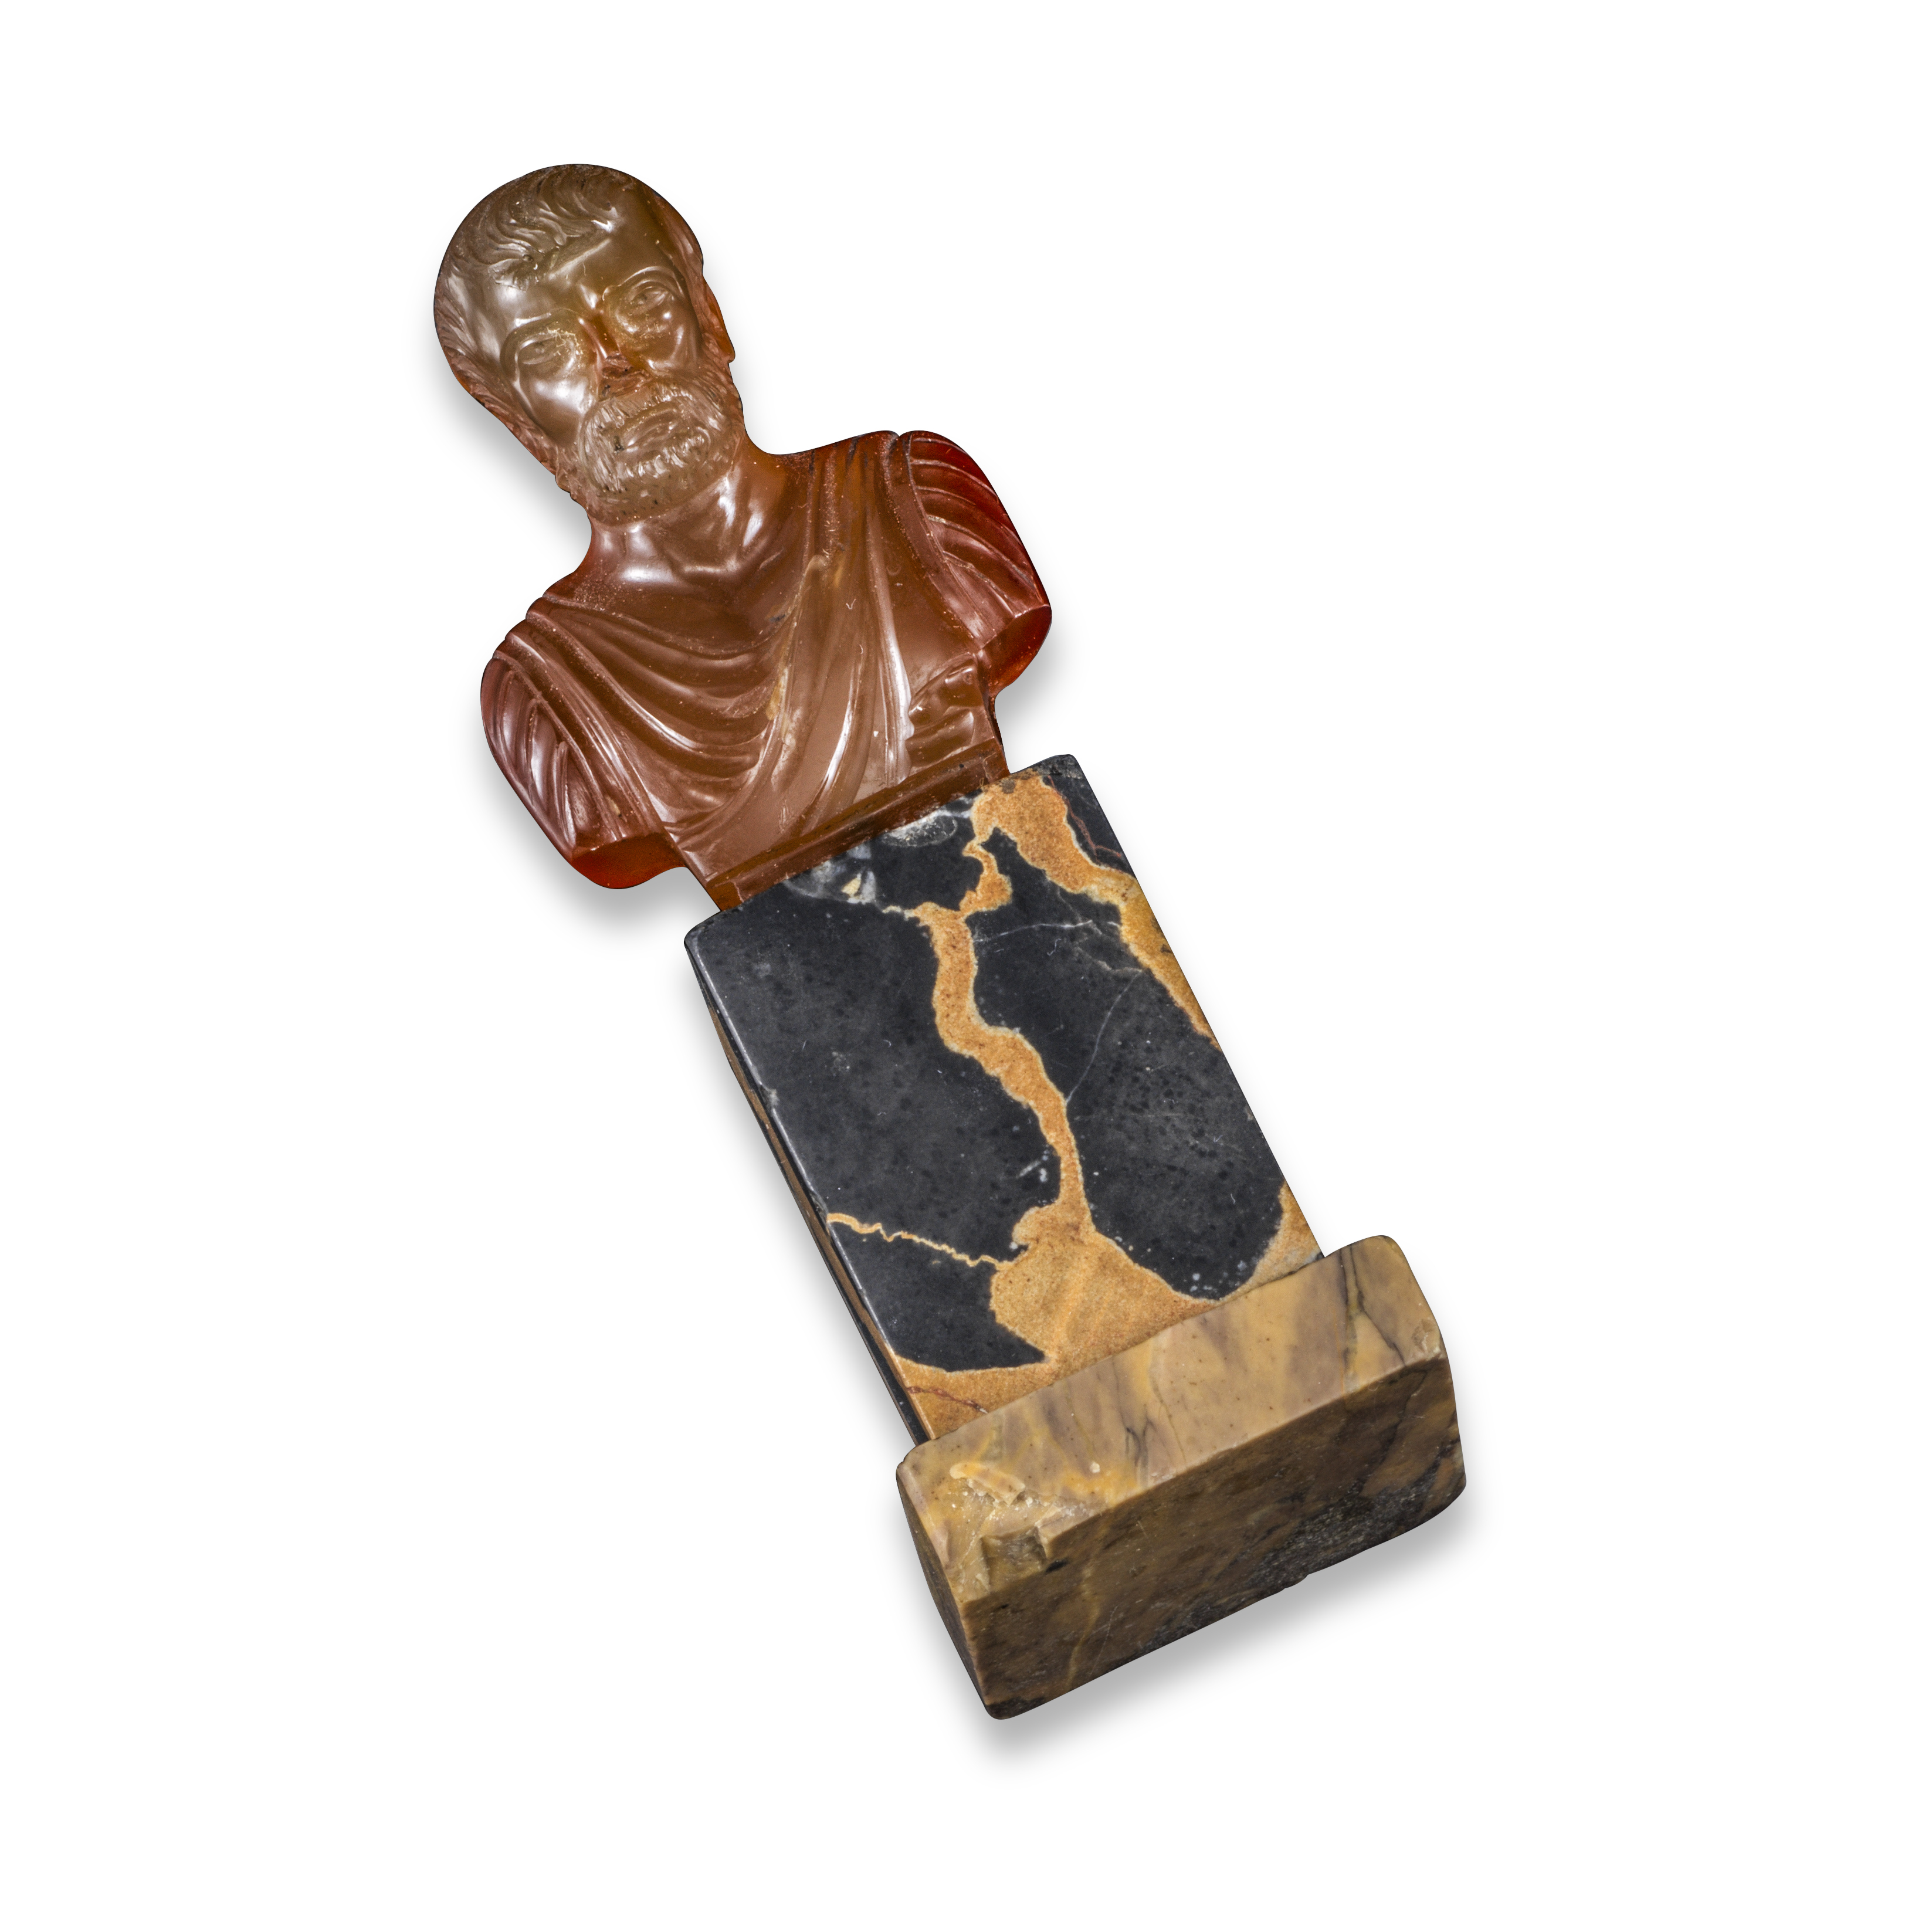 A mid 17th century carved agate bust, probably depicting a Roman Senator wearing robes, on a